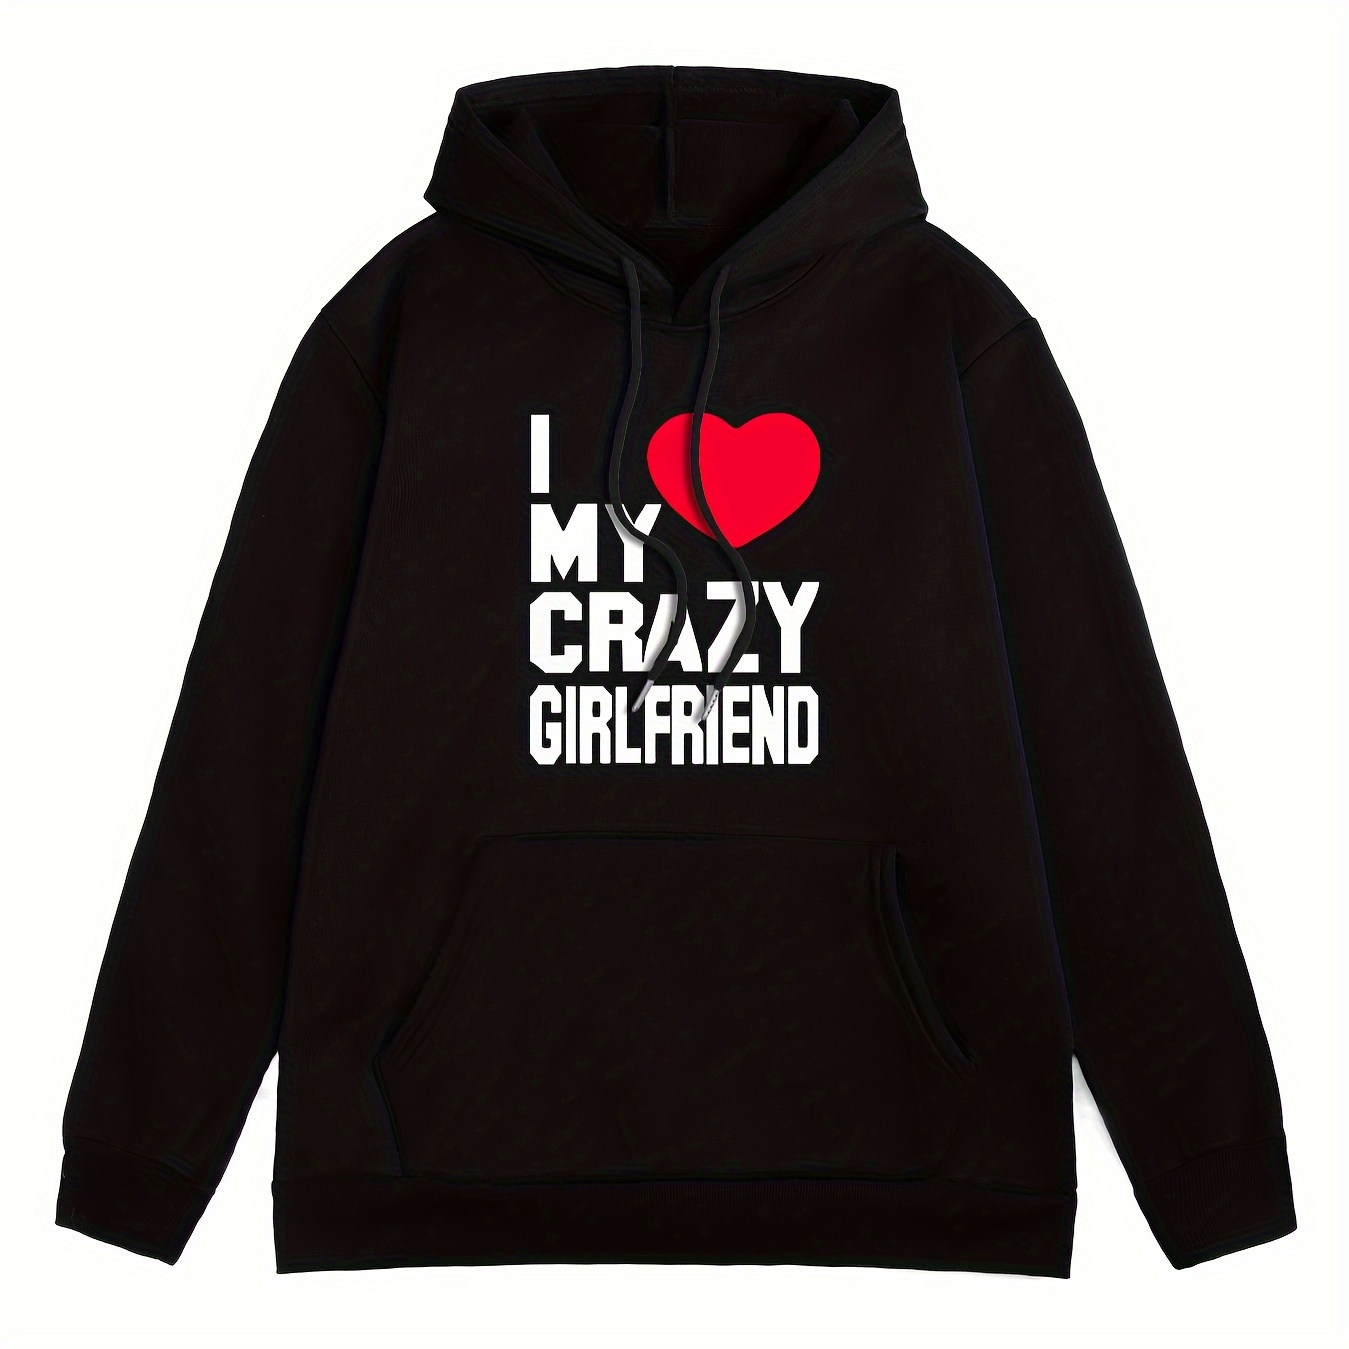 

I Love My Crazy Girlfriend Print Hoodie, Cool Sweatshirt For Men, Men's Casual Hooded Pullover Streetwear Clothing For Spring Fall Winter, As Gifts